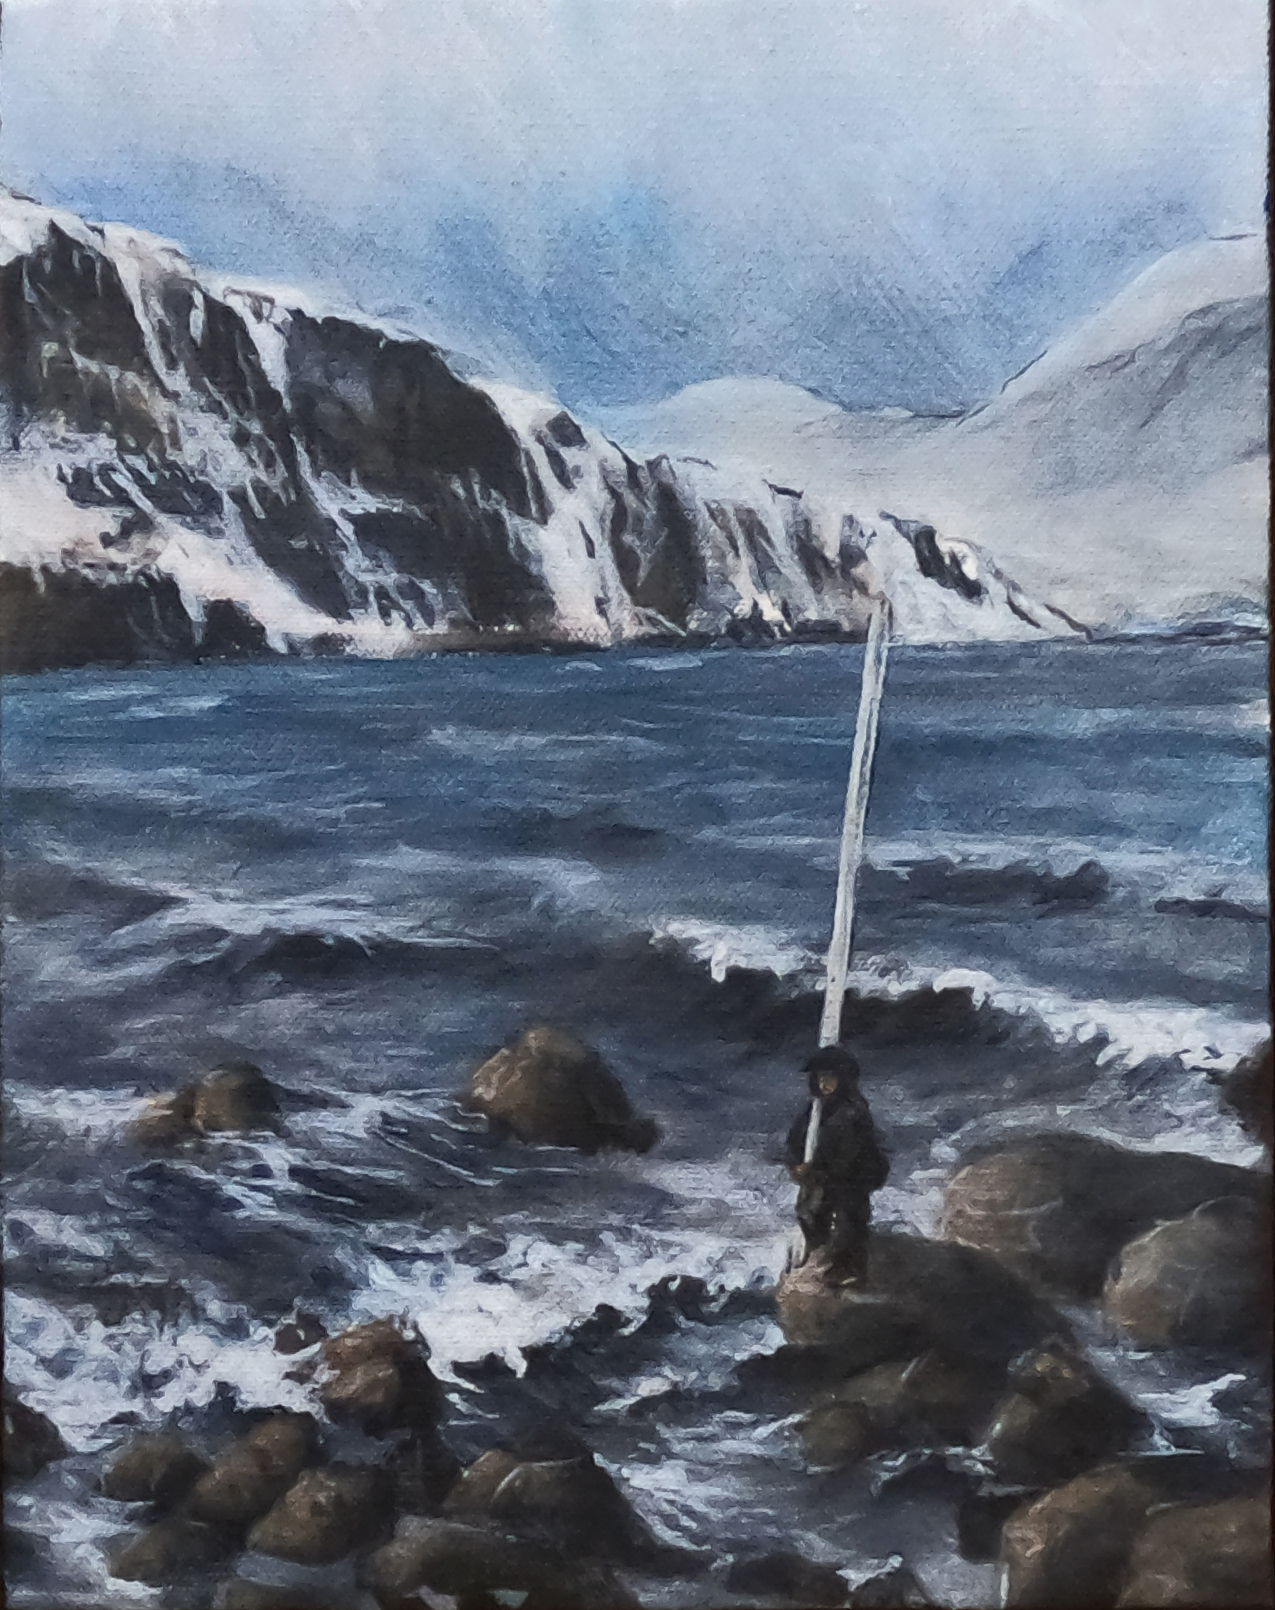 The painting shows a person in a rain slicker holding a staff over twice their height and standing on coastal rocks that are surrounded by choppy water. In the background of the painting is a landscape of snowy mountains and an overcast sky. 